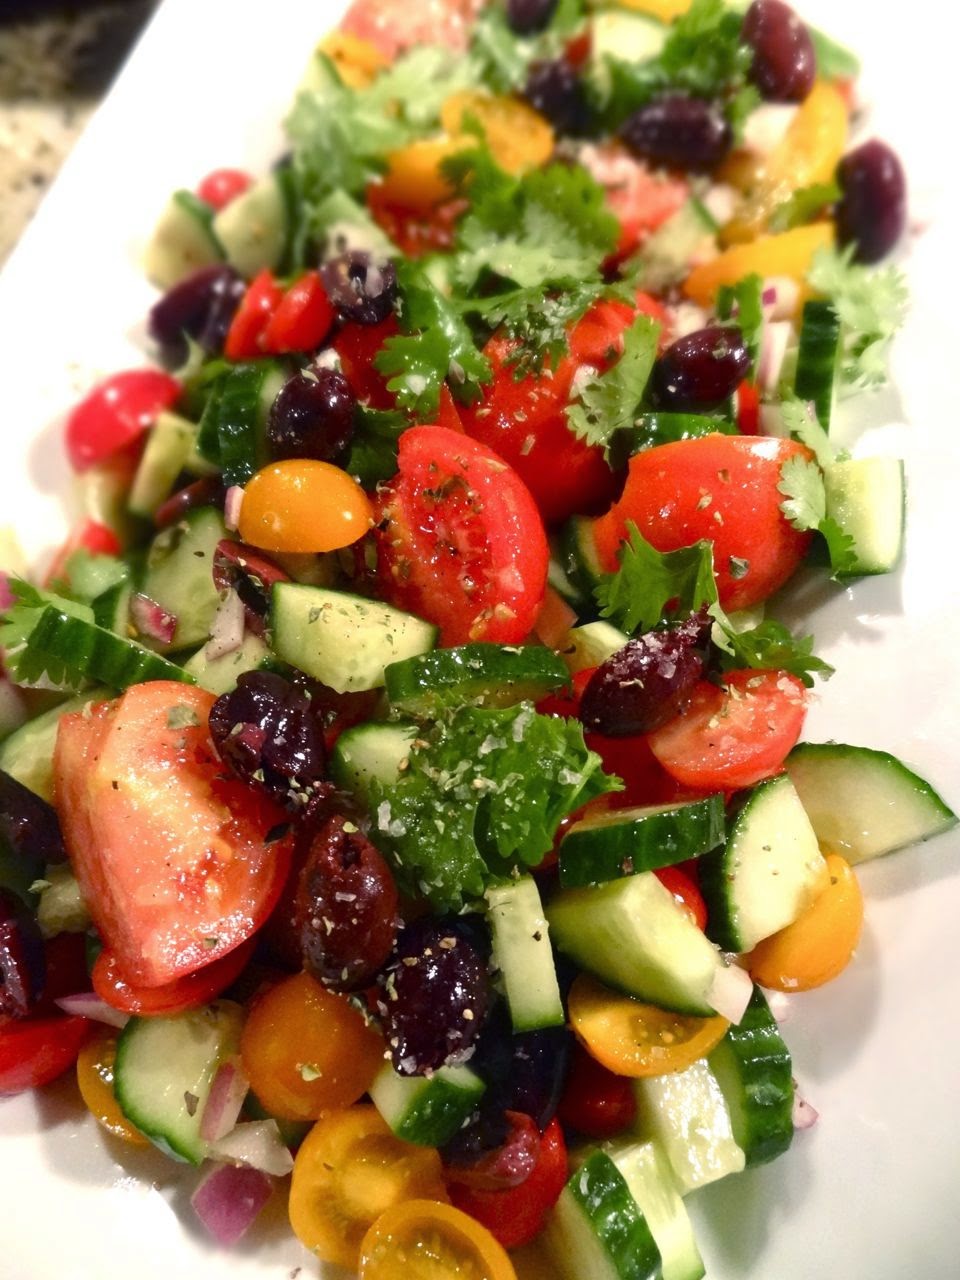 Scrumpdillyicious: Mixed Tomato Salad with Cucumber &amp; Olives